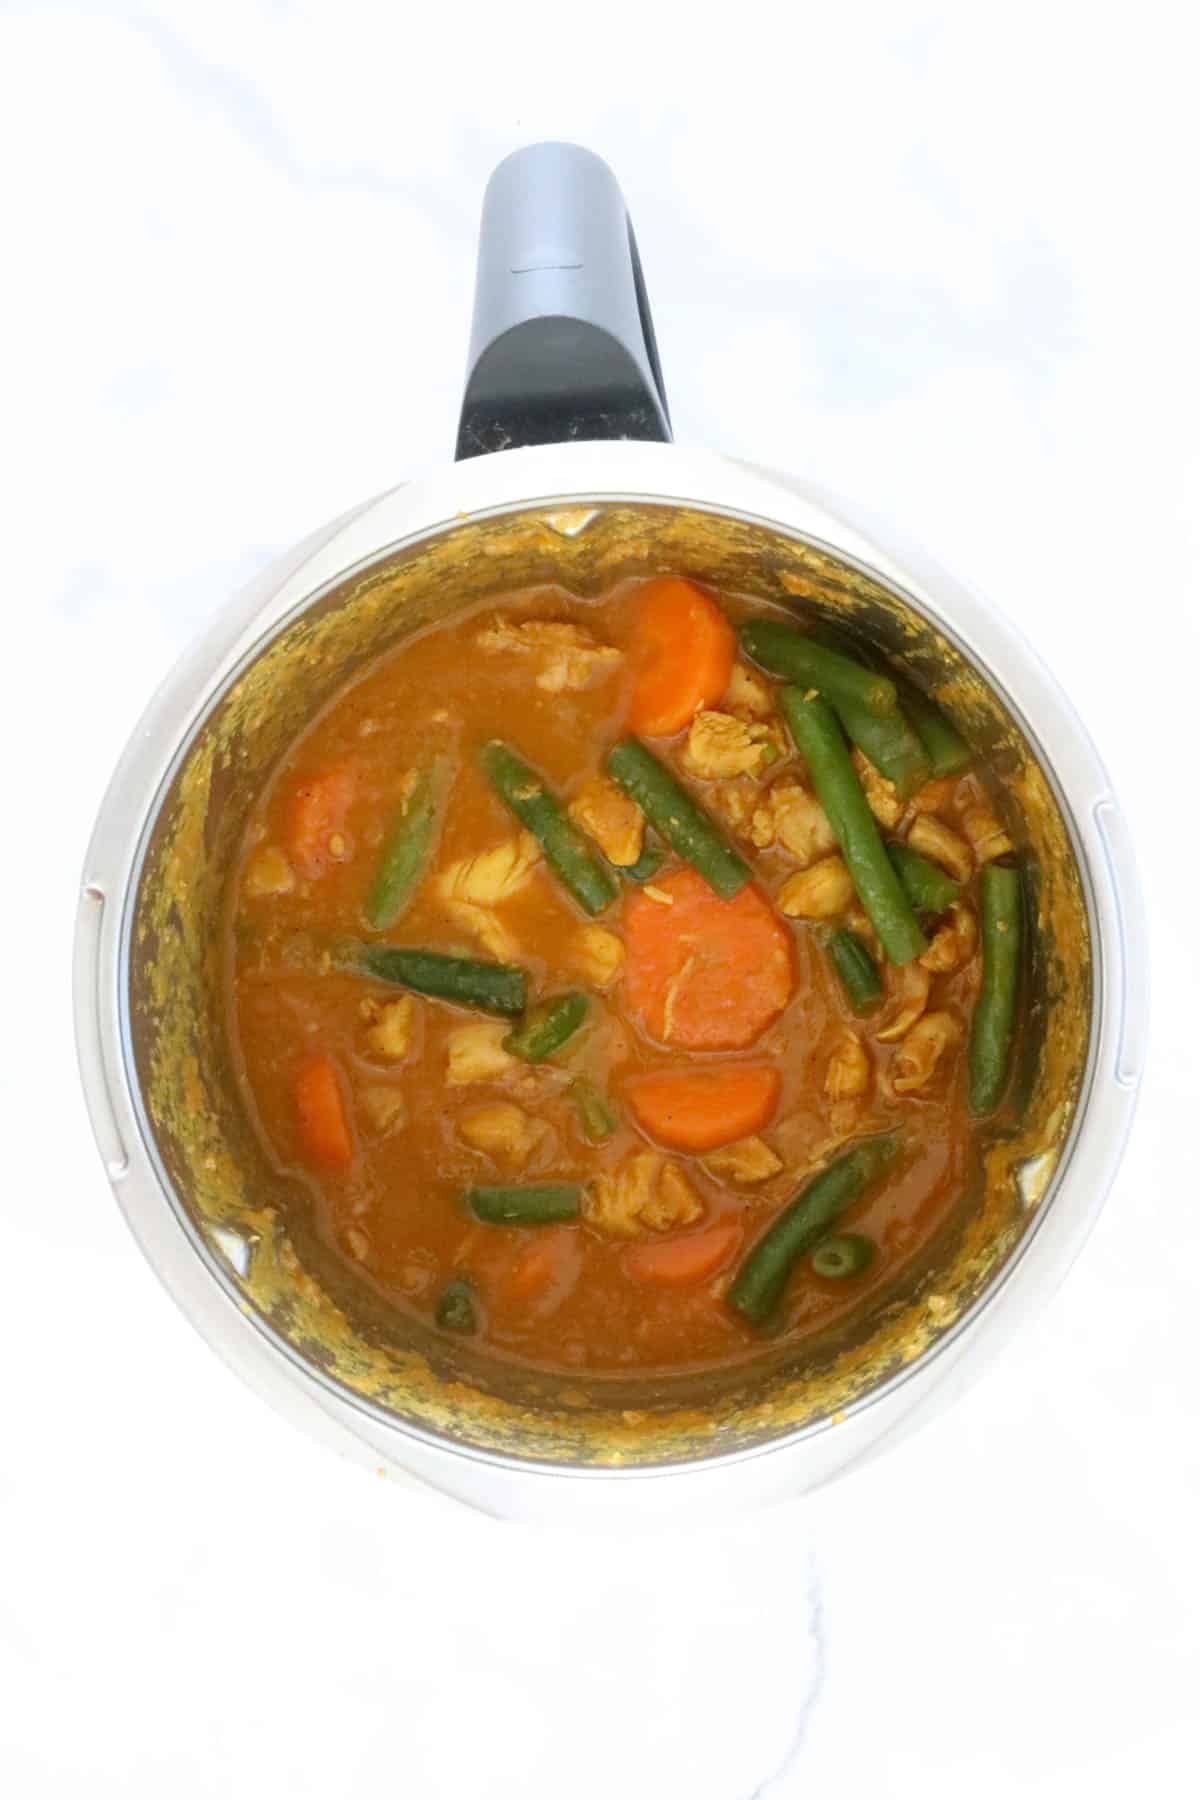 Chicken and vegetables in a curry sauce in a Thermomix.